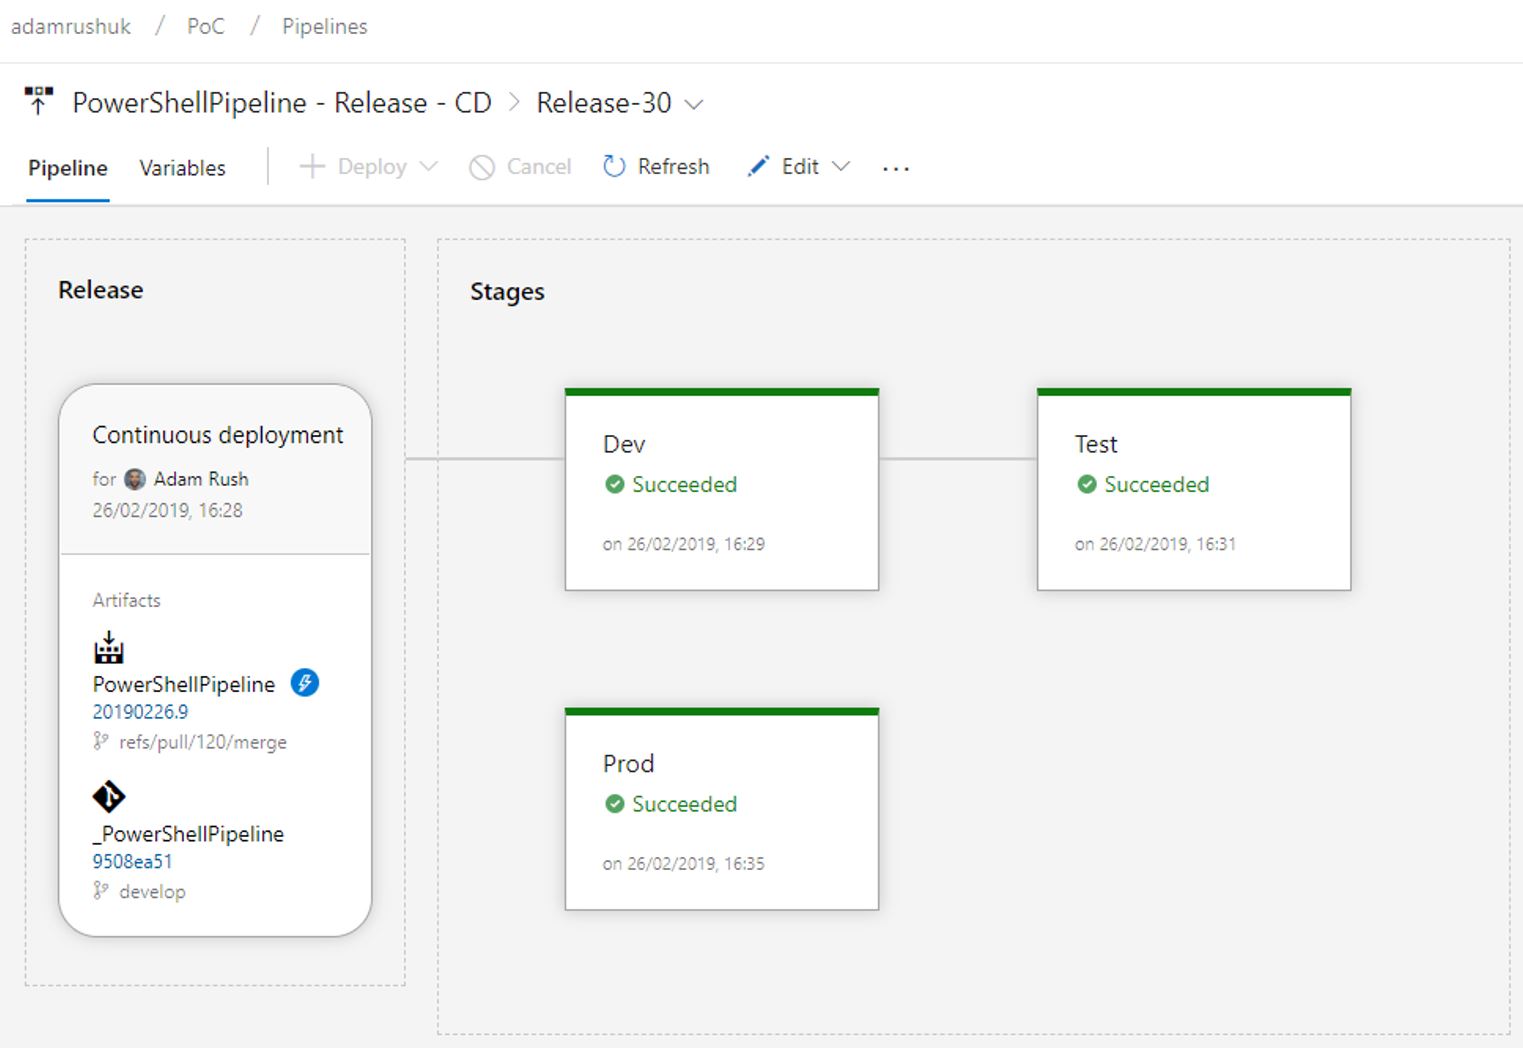 Deploy Acumatica Customizations with Confidence Thanks to Continuous Integration & Delivery